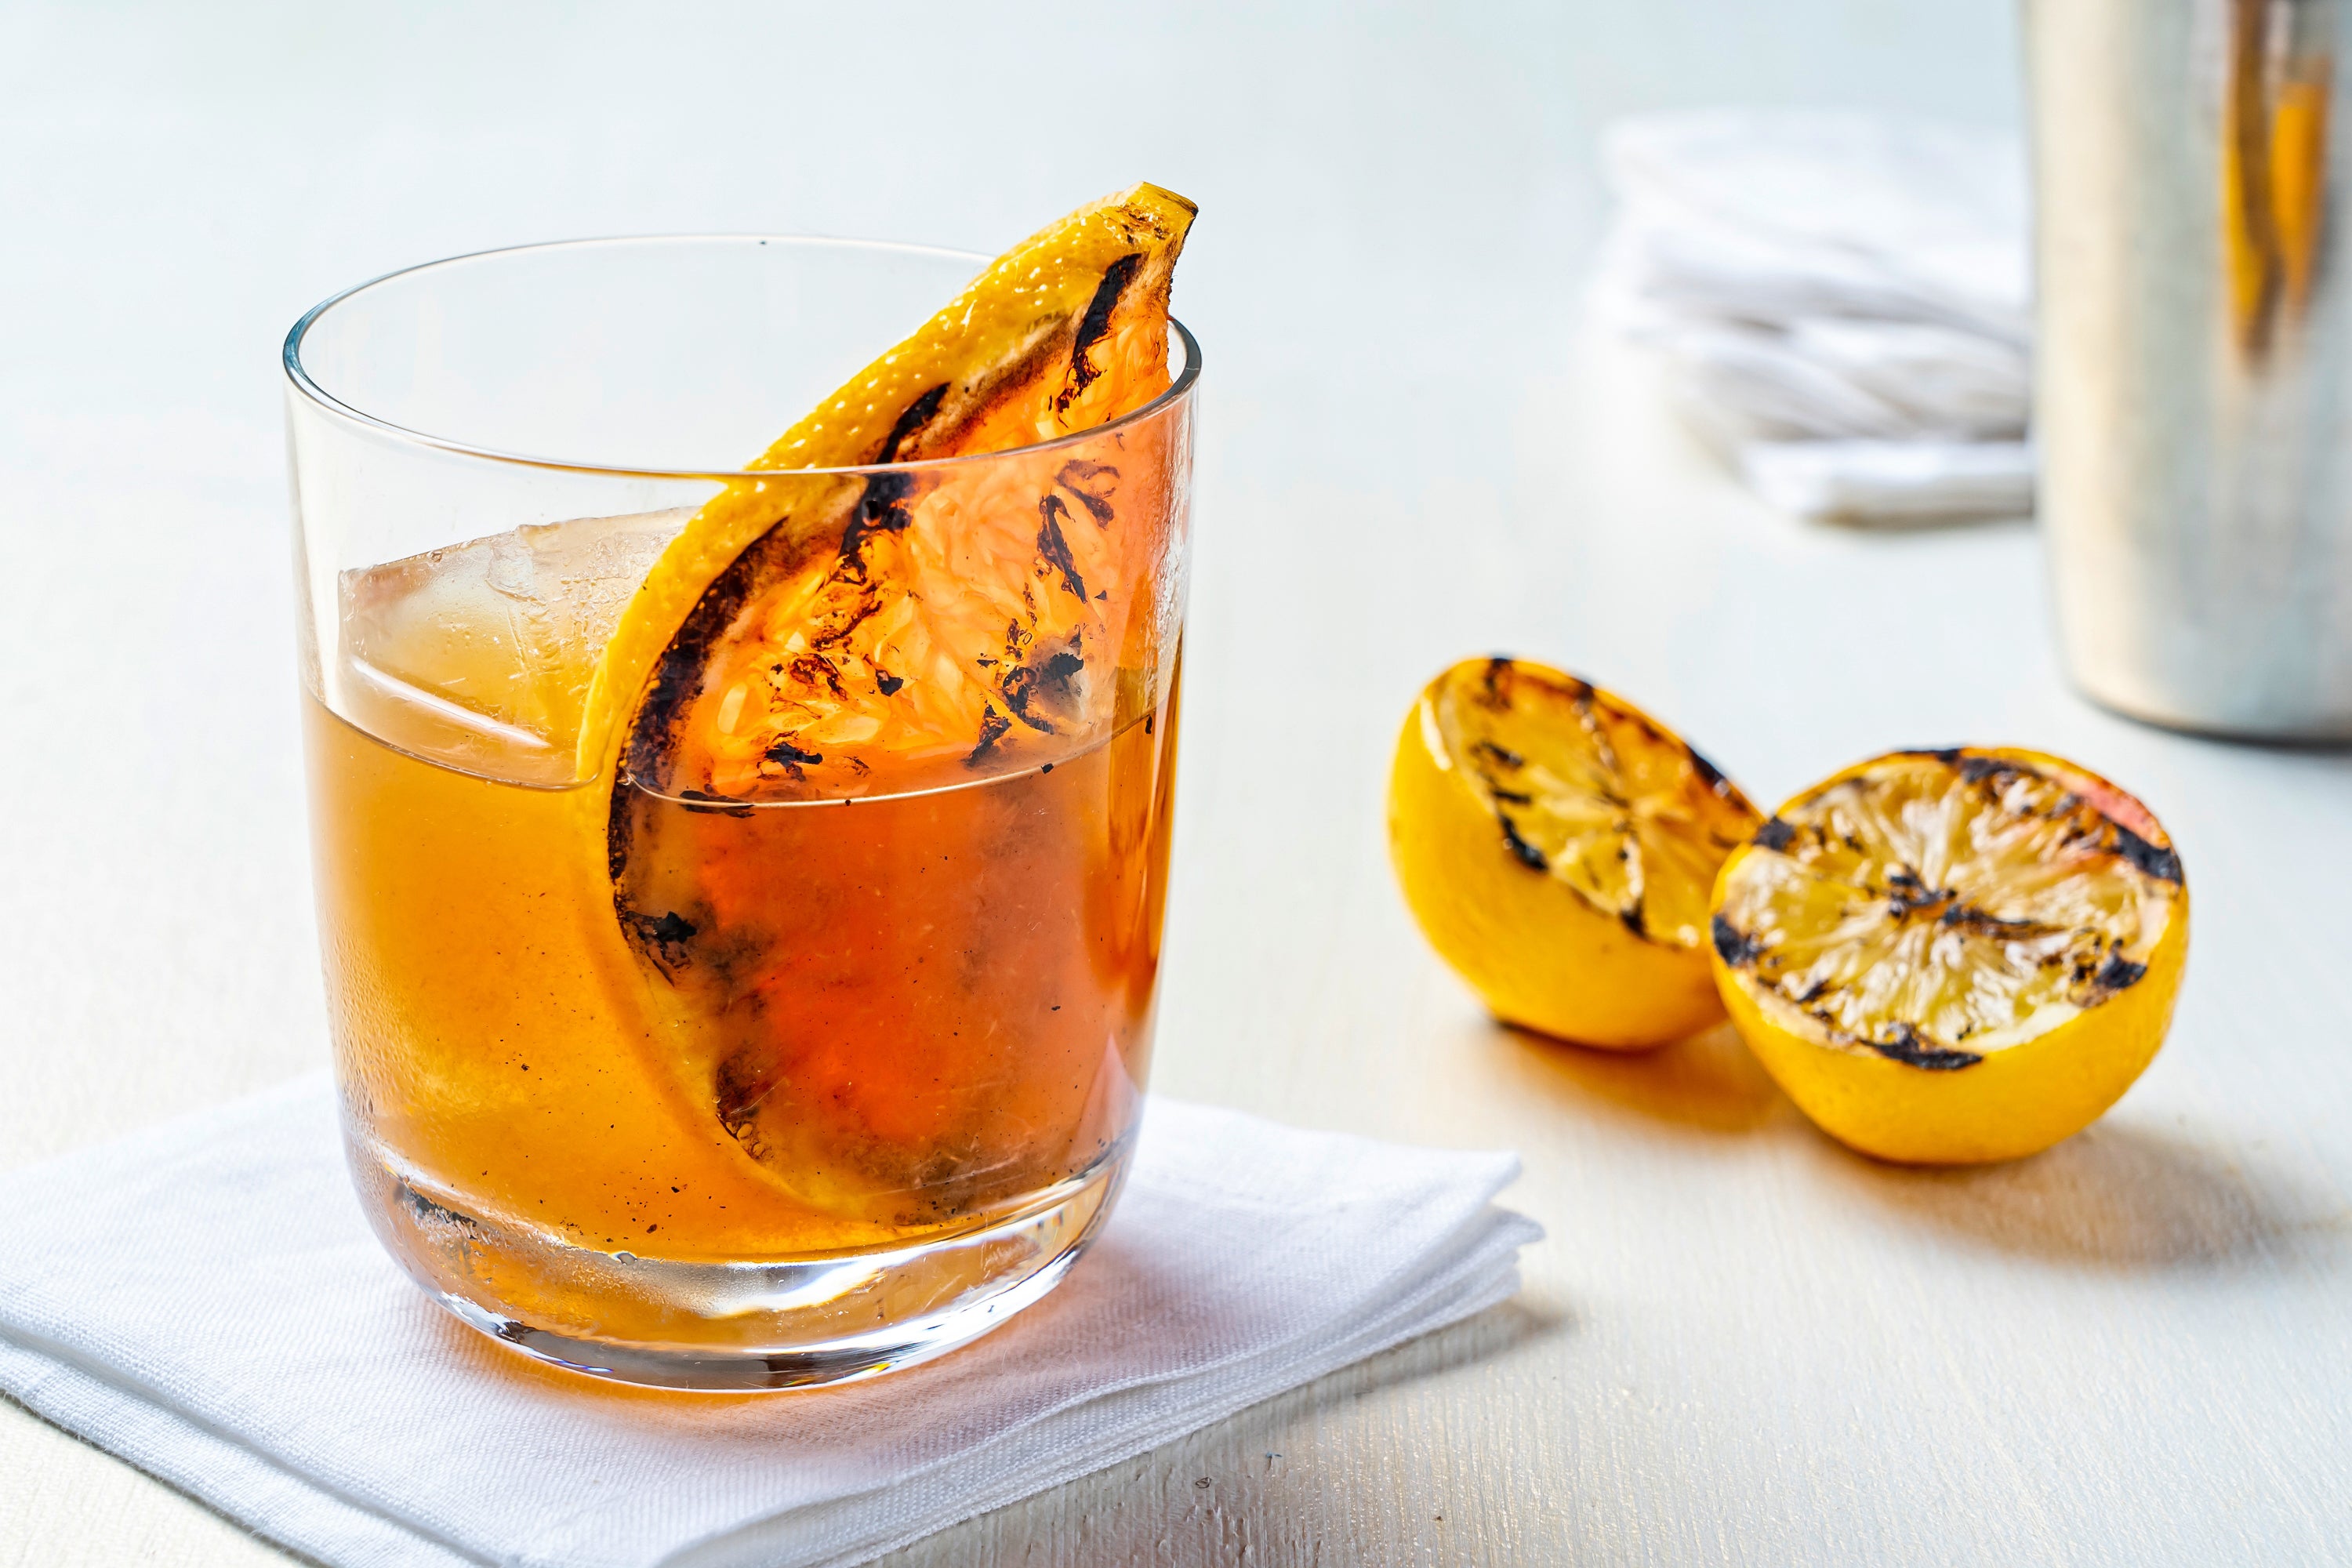 These citrus-forward cocktails are perfectly balanced with just the right amount of smokiness.